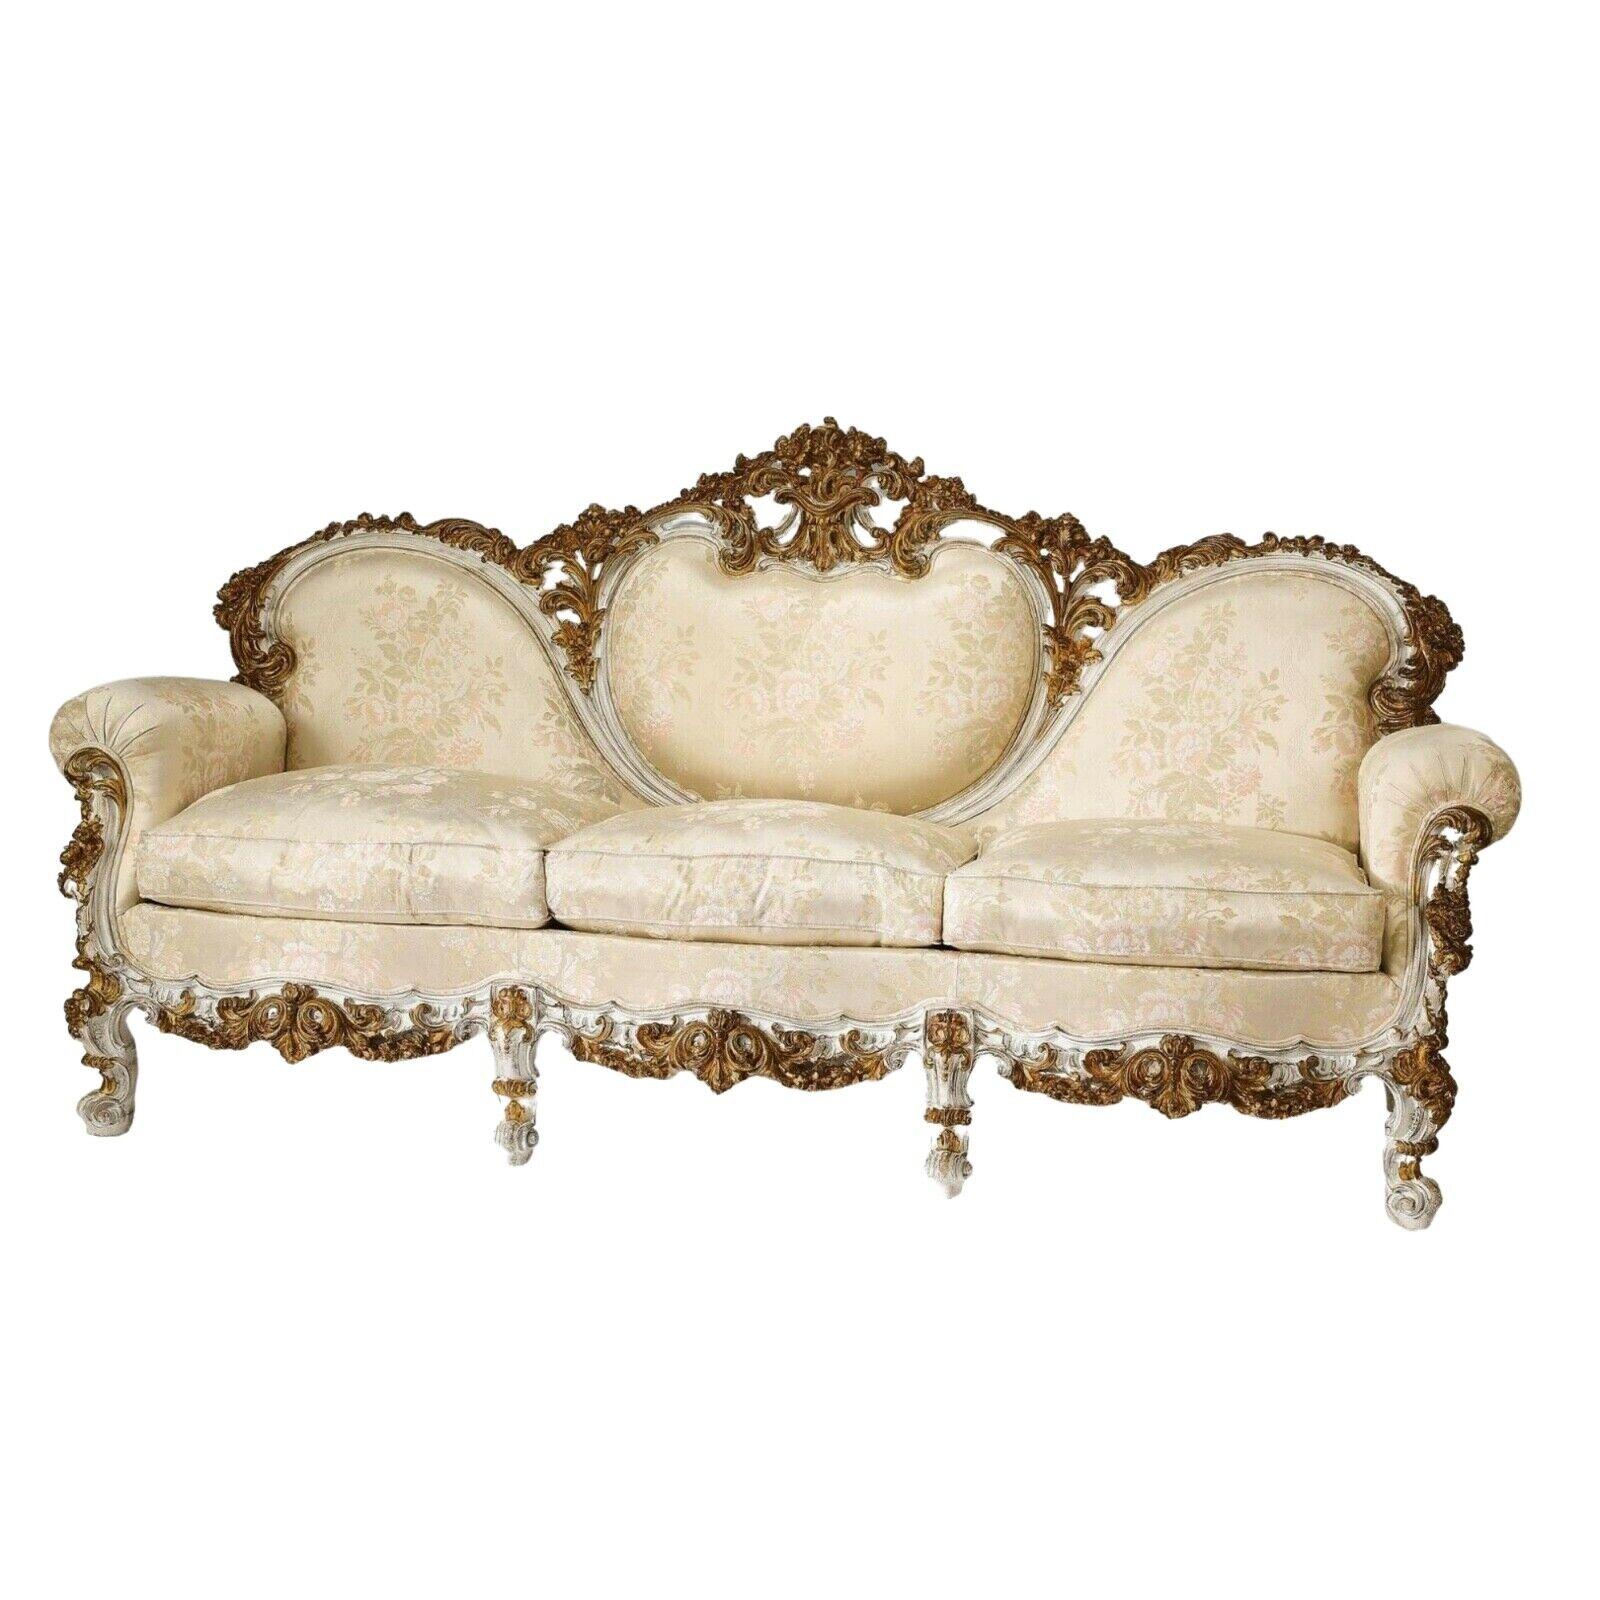 Stunning sofa, Bergeres, Italian Rococo style carved and gilt, Satin Brocade, set of 3!

Pair of Italian Rococo style carved bergeres, each having a parcel gilt and paint-decorated pierce carved crest rail surmounting the cabachon back, custom